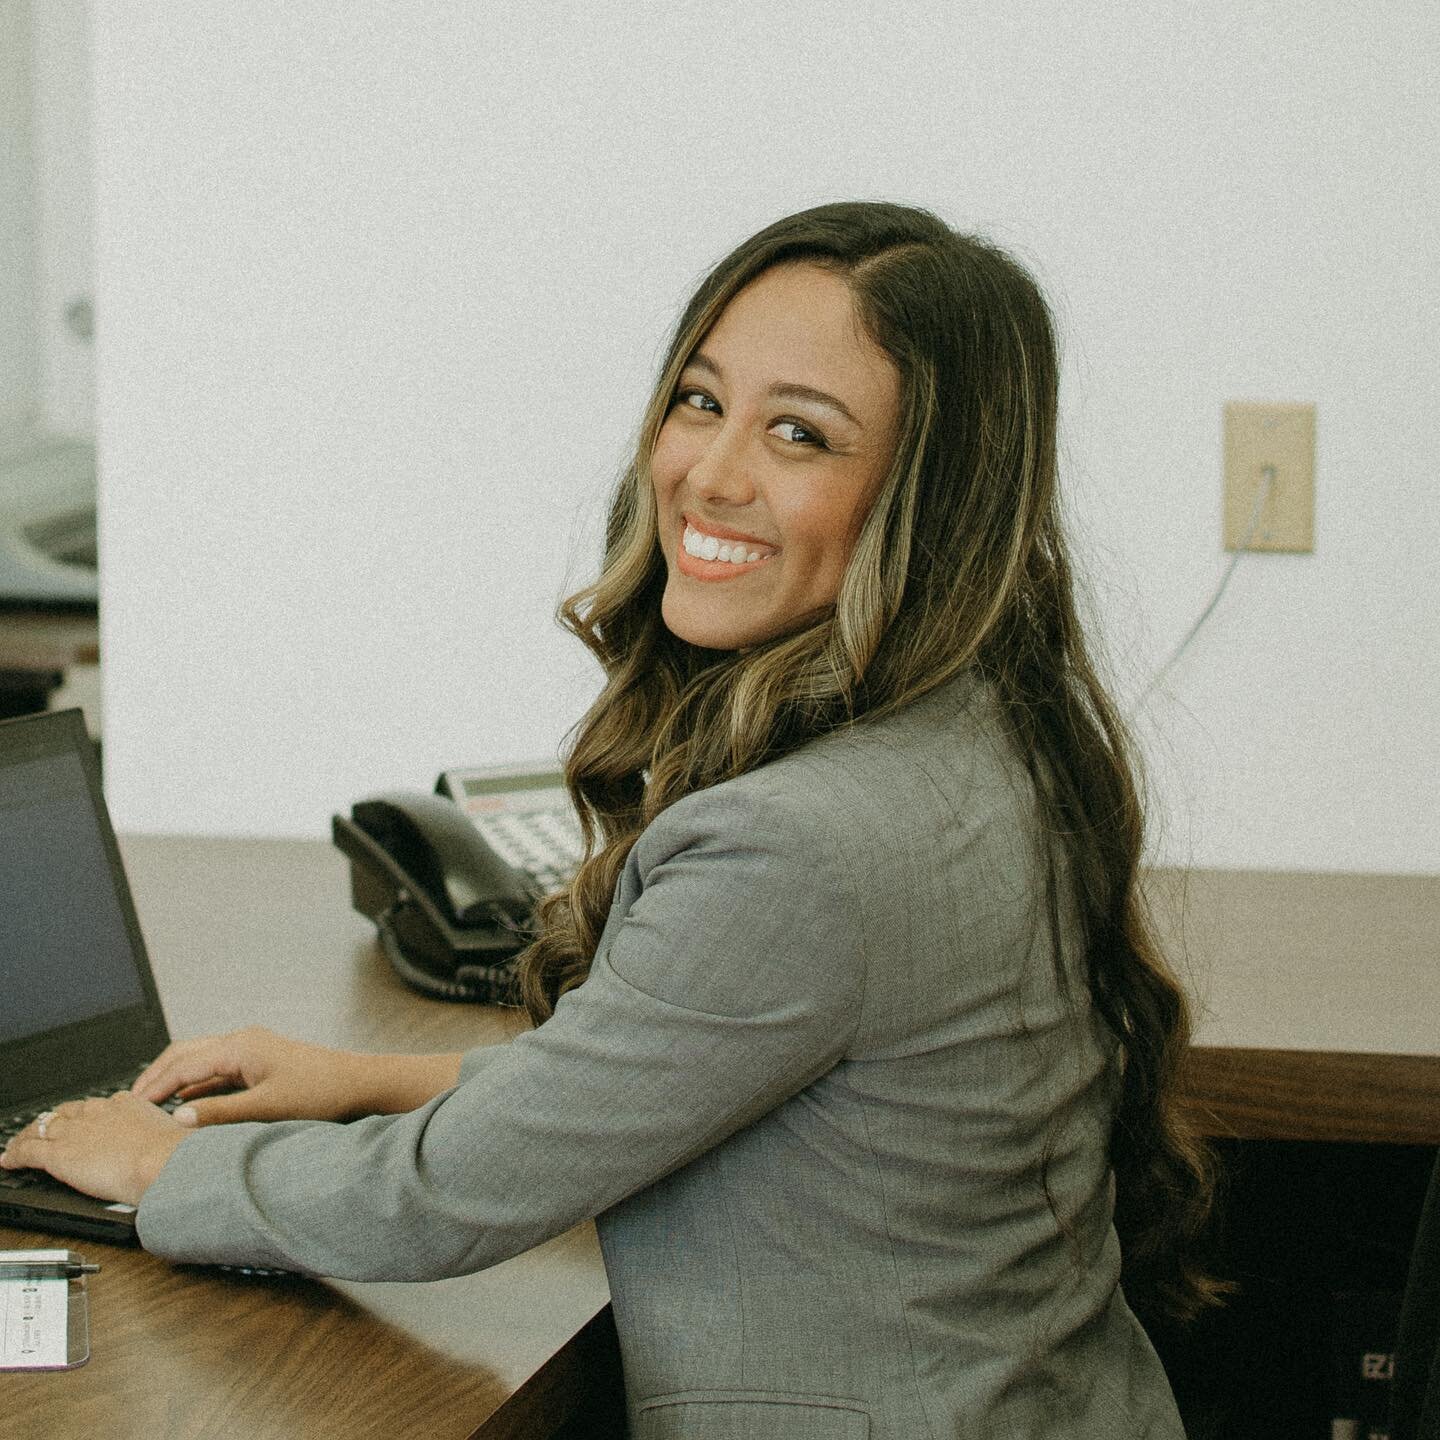 Meet Jenn! An MBA graduate with a fresh perspective, Jenn joined the C &amp; J crew in 2017, and now serves as a key member of the team. She is especially drawn to technology-based solutions and is always dreaming up new ideas to maximize work effici